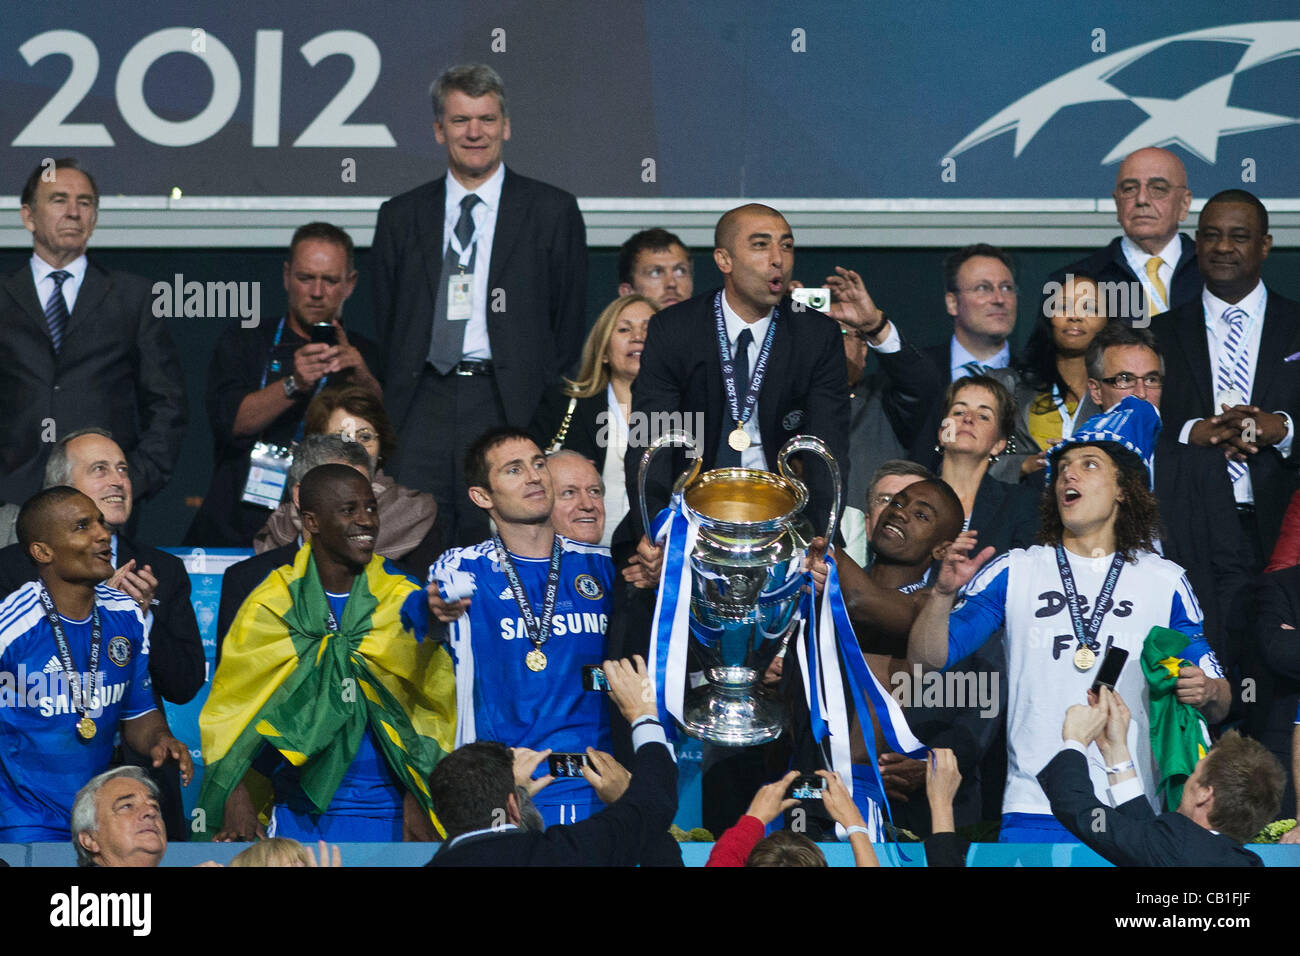 Roberto Di Matteo Coach (Chelsea), MAY 19, 2012 - Football / Soccer :  Chelsea team group celebrates with Trophy during the ceremony after winning  the UEFA Champions League 2011-2012 Final match between